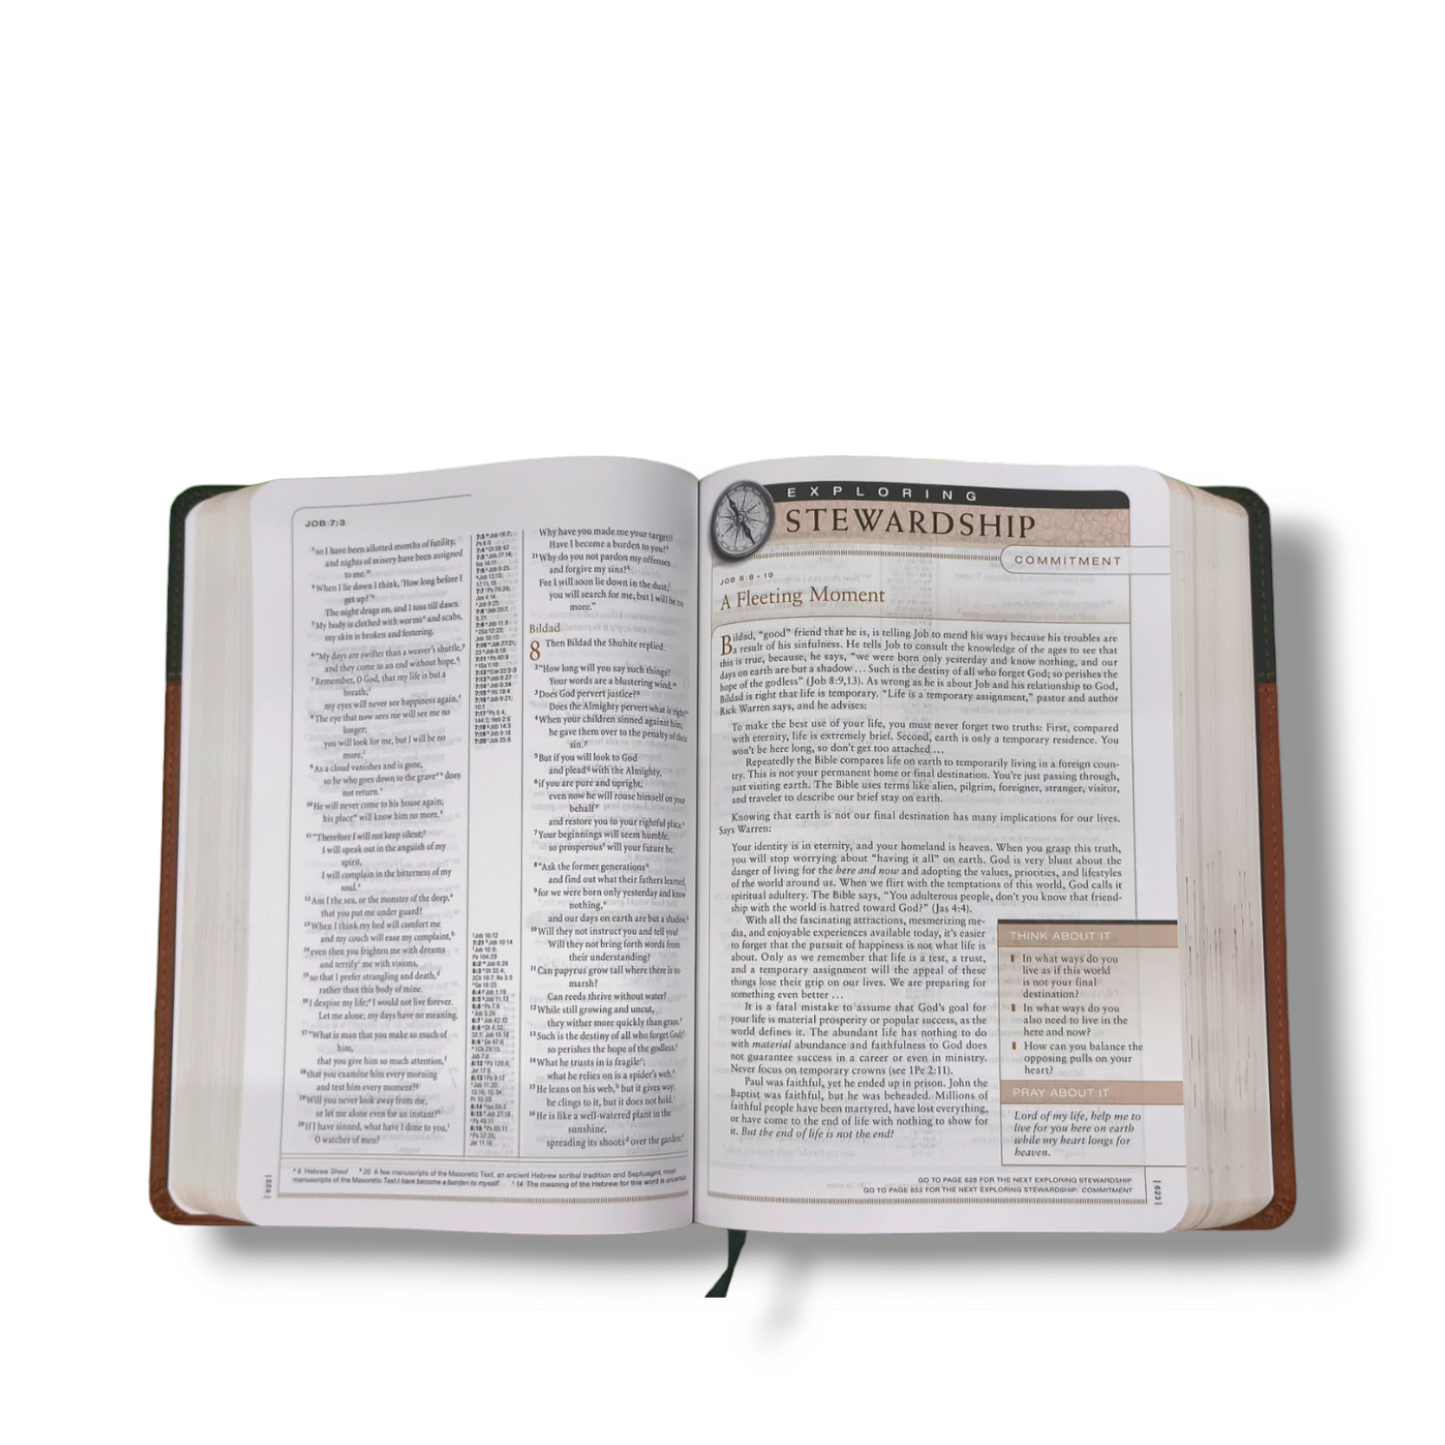 NKJV The Open Bible | Complete Reference System | Study Bible  Black Leather Cover Edition | Personal Reference | With Related Pictures  | New Edition